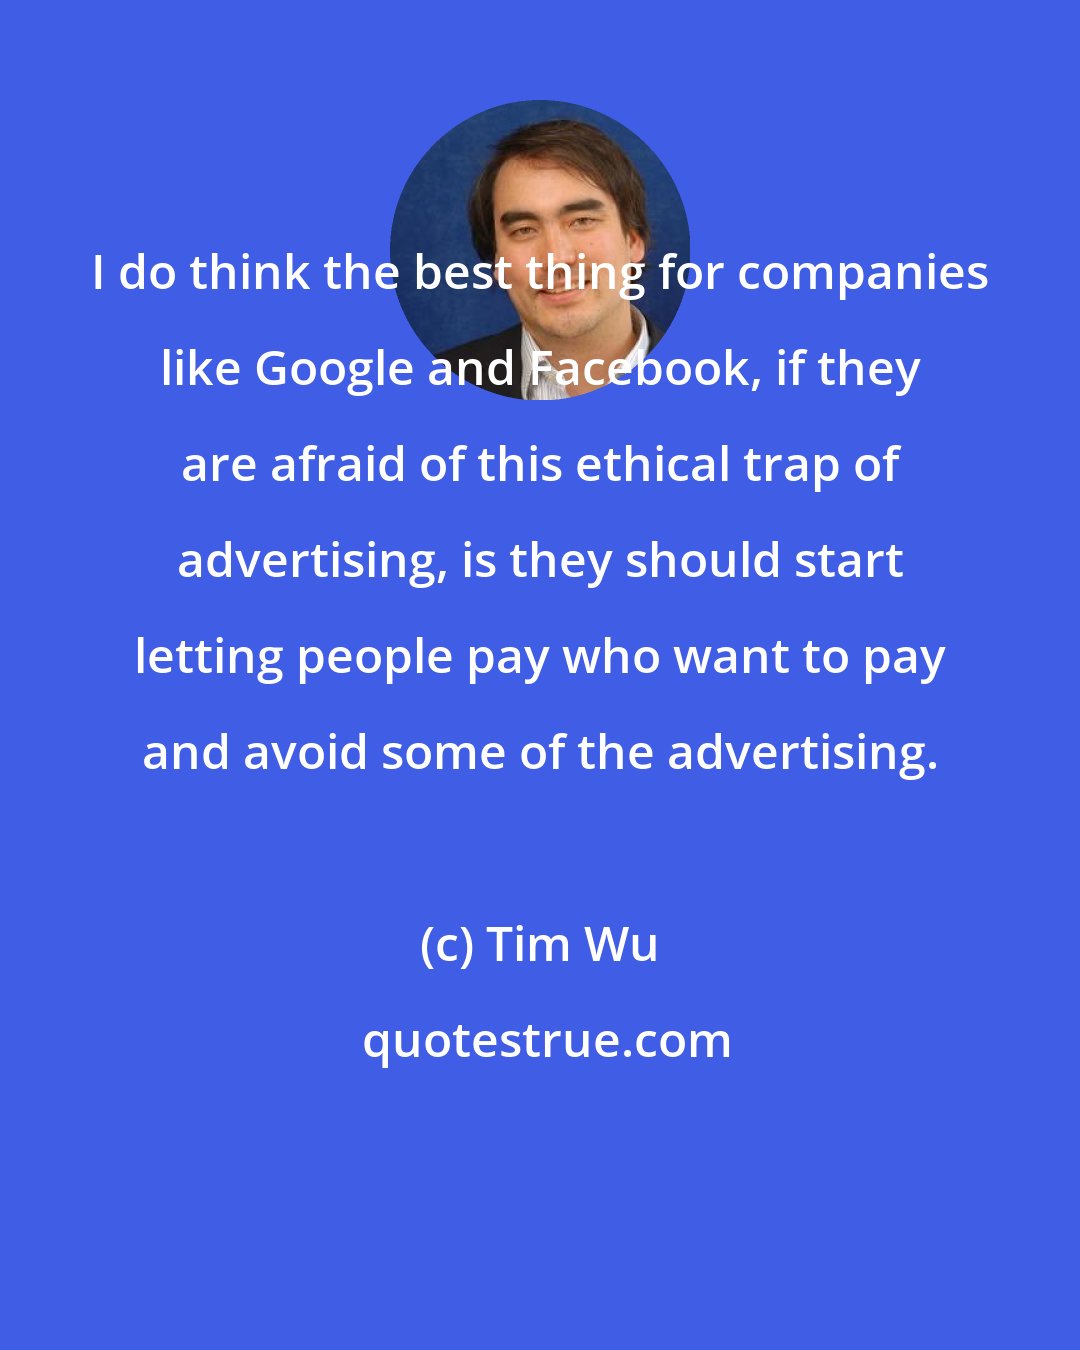 Tim Wu: I do think the best thing for companies like Google and Facebook, if they are afraid of this ethical trap of advertising, is they should start letting people pay who want to pay and avoid some of the advertising.